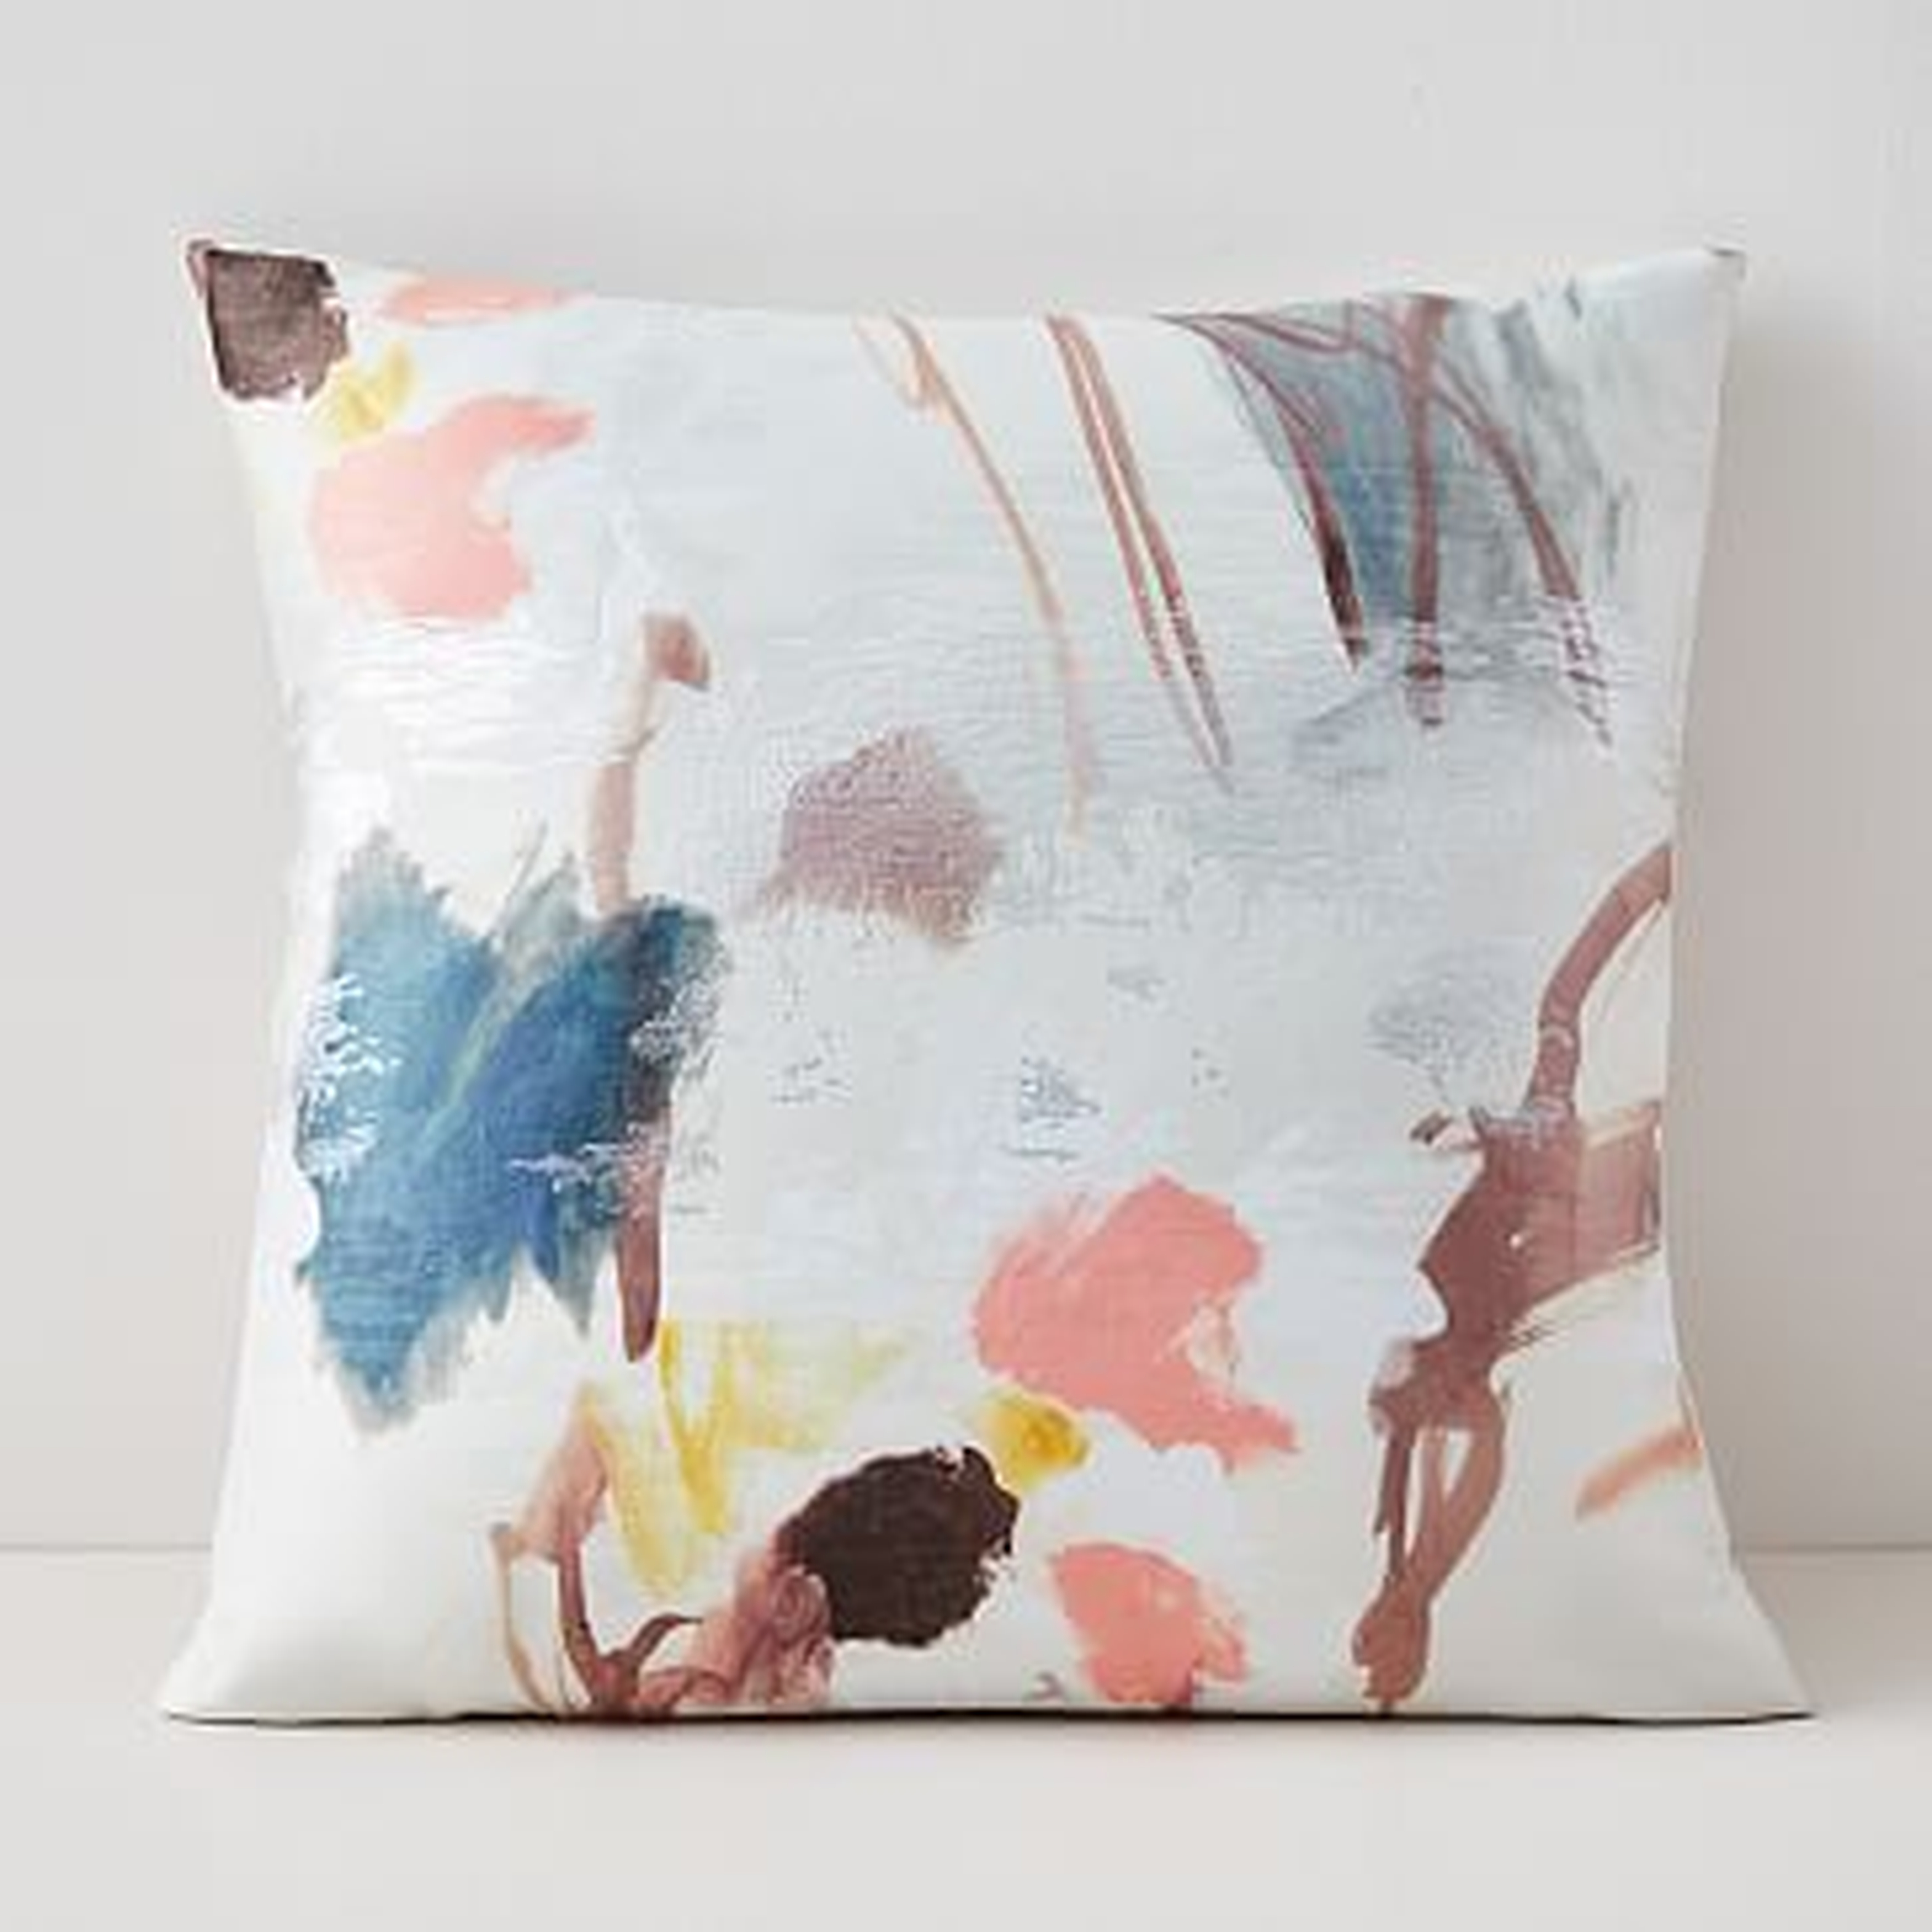 Gilded Watercolor Brocade Pillow Cover, 20"x20", Multi - West Elm